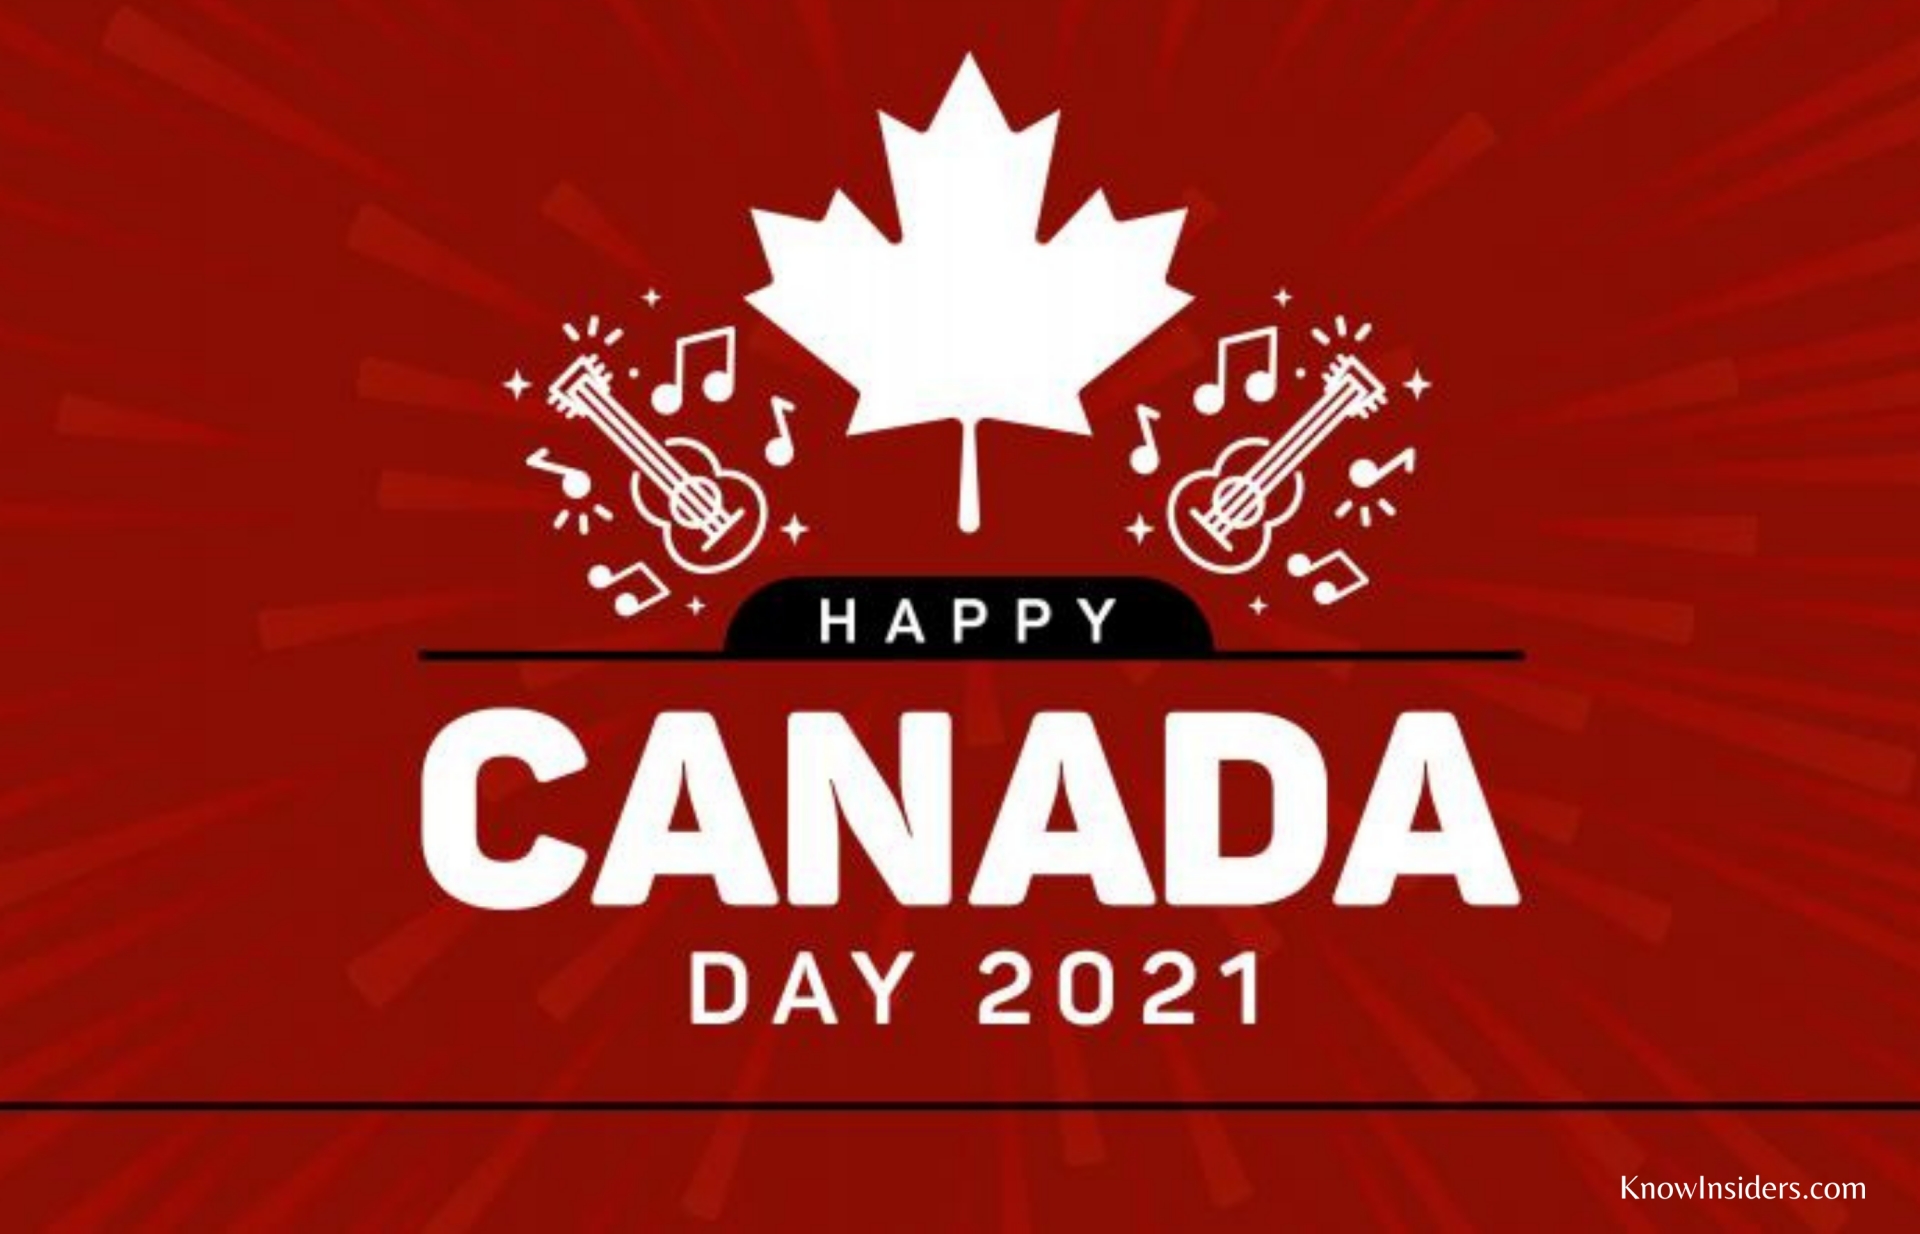 Canada Day (July 1): History, Meaning, Trivia, Celebrations and Facts